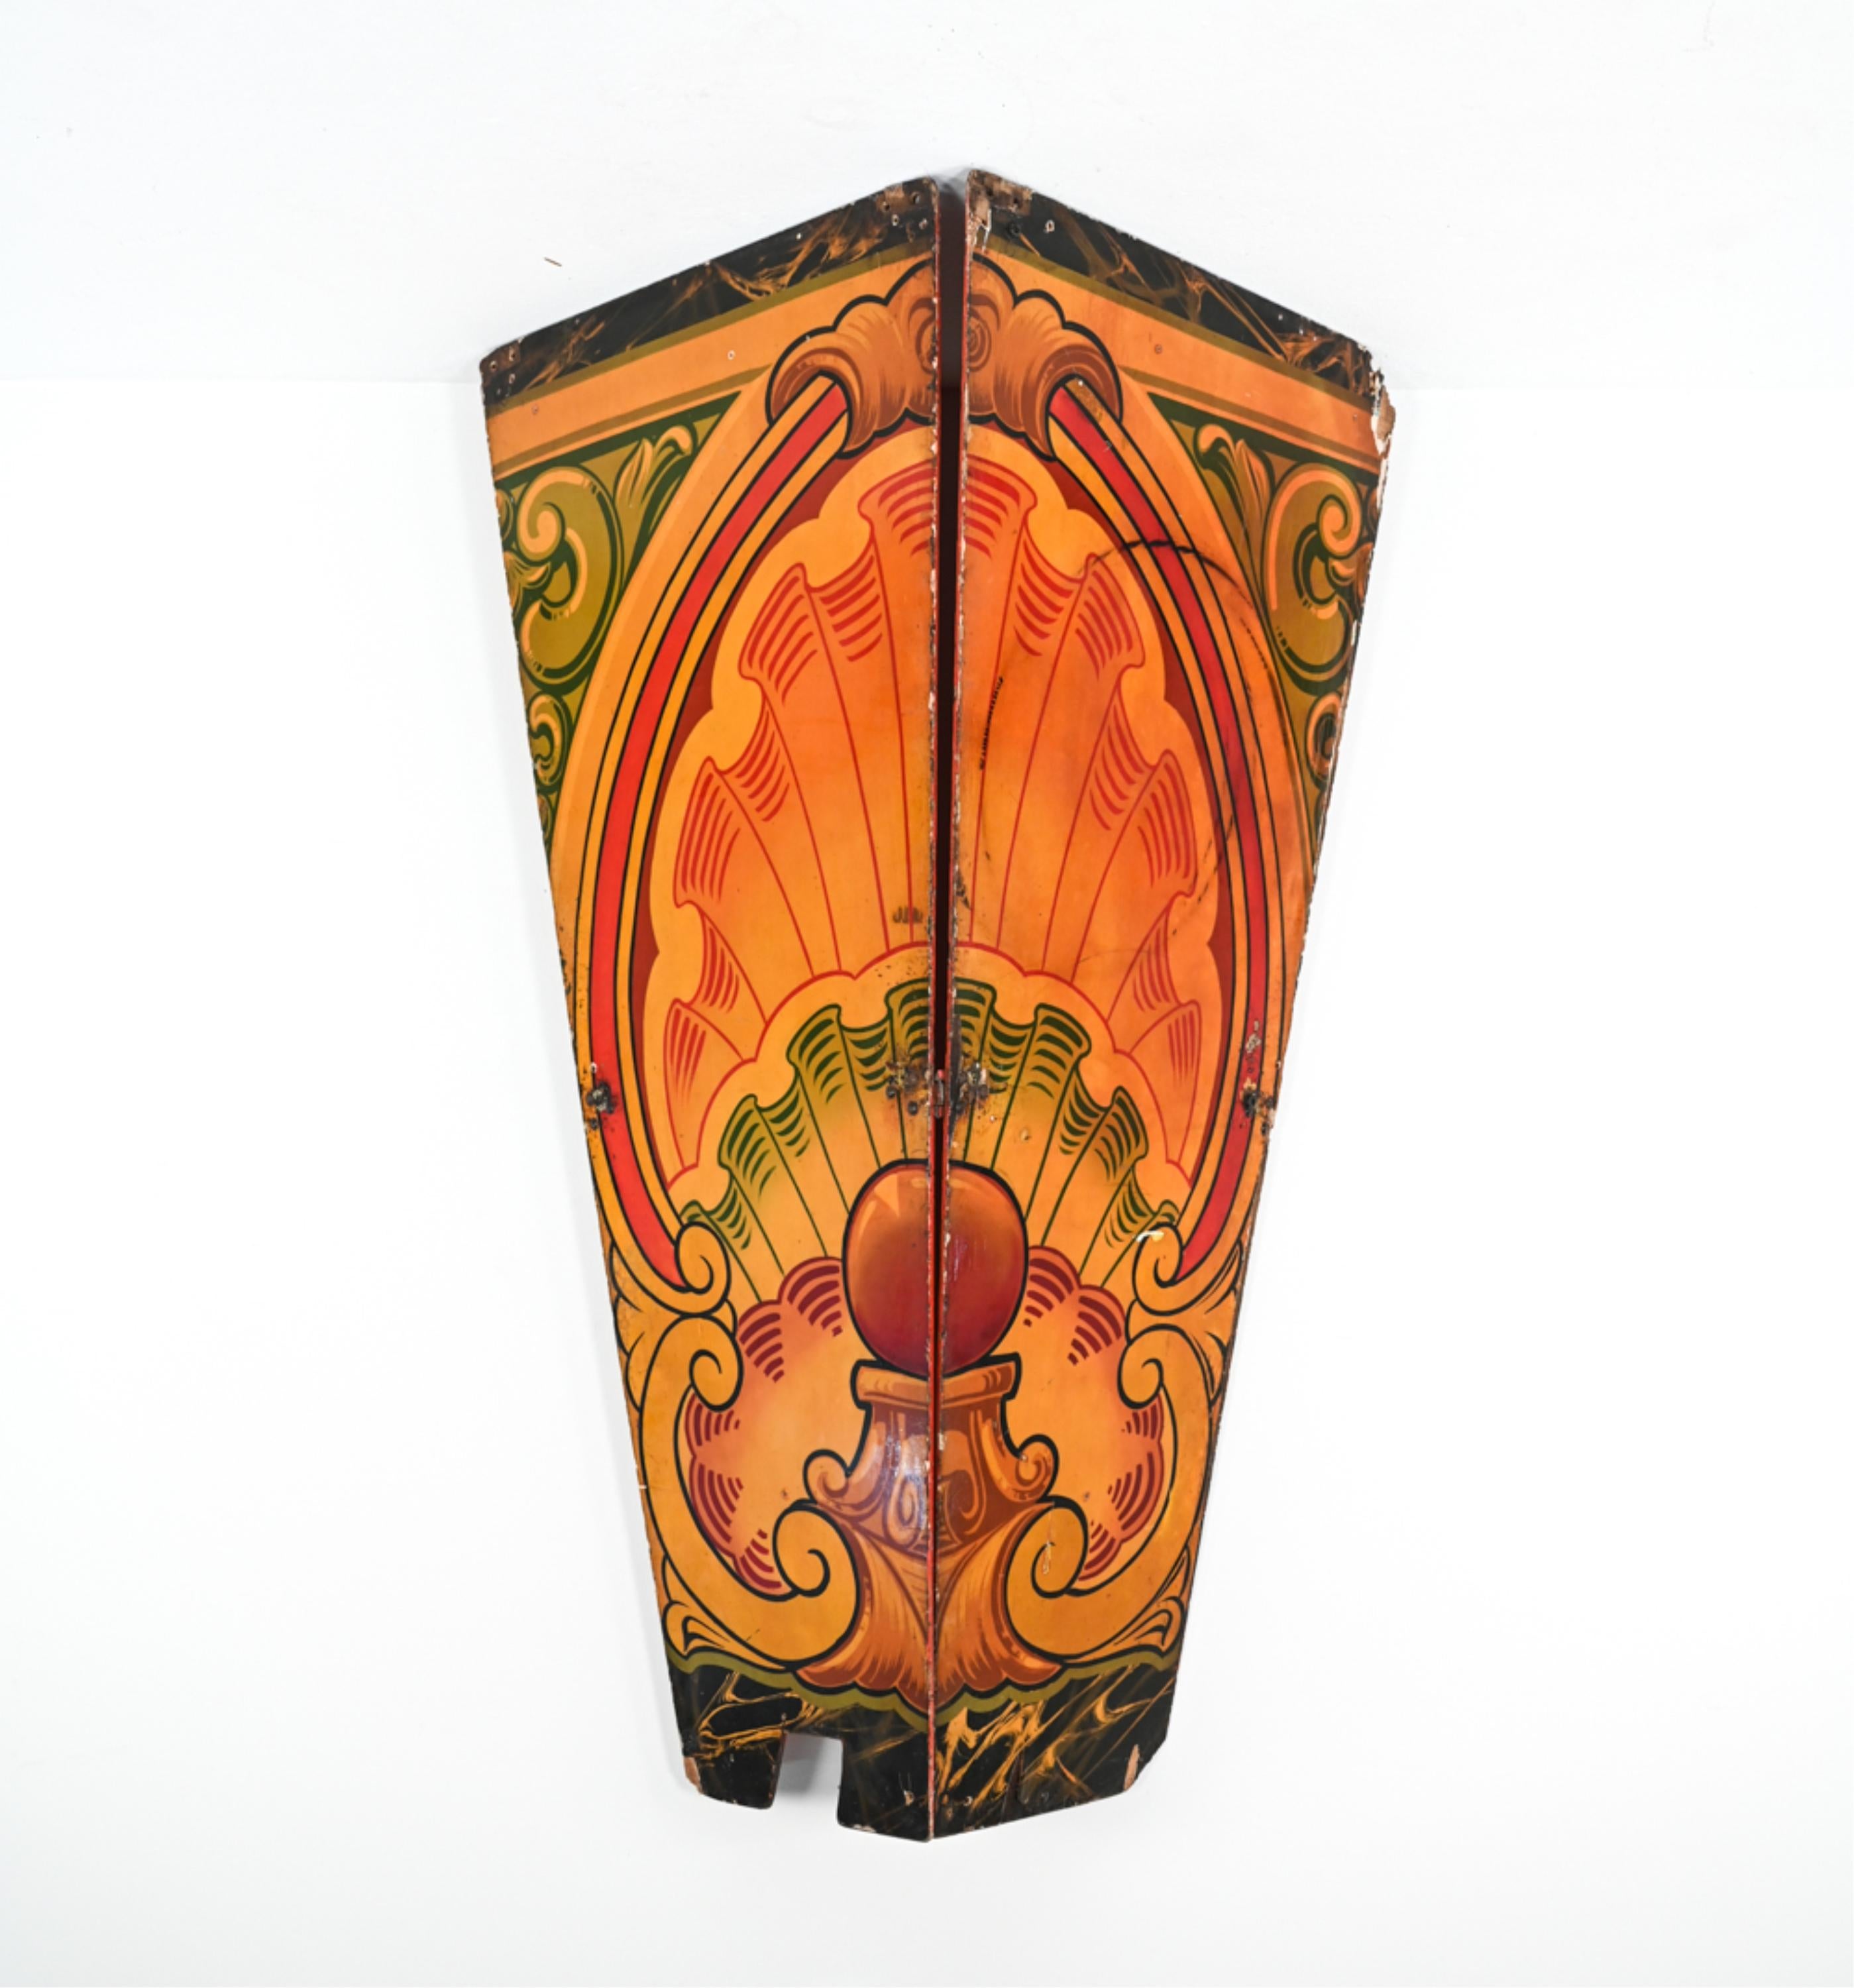 Bring an unusual piece of folk history into your home with this stunning pair of early 20th century rounding boards salvaged from a carnival. With hand painted designs and gold leaf pigment, these boards are a whimsical, decorative architectural